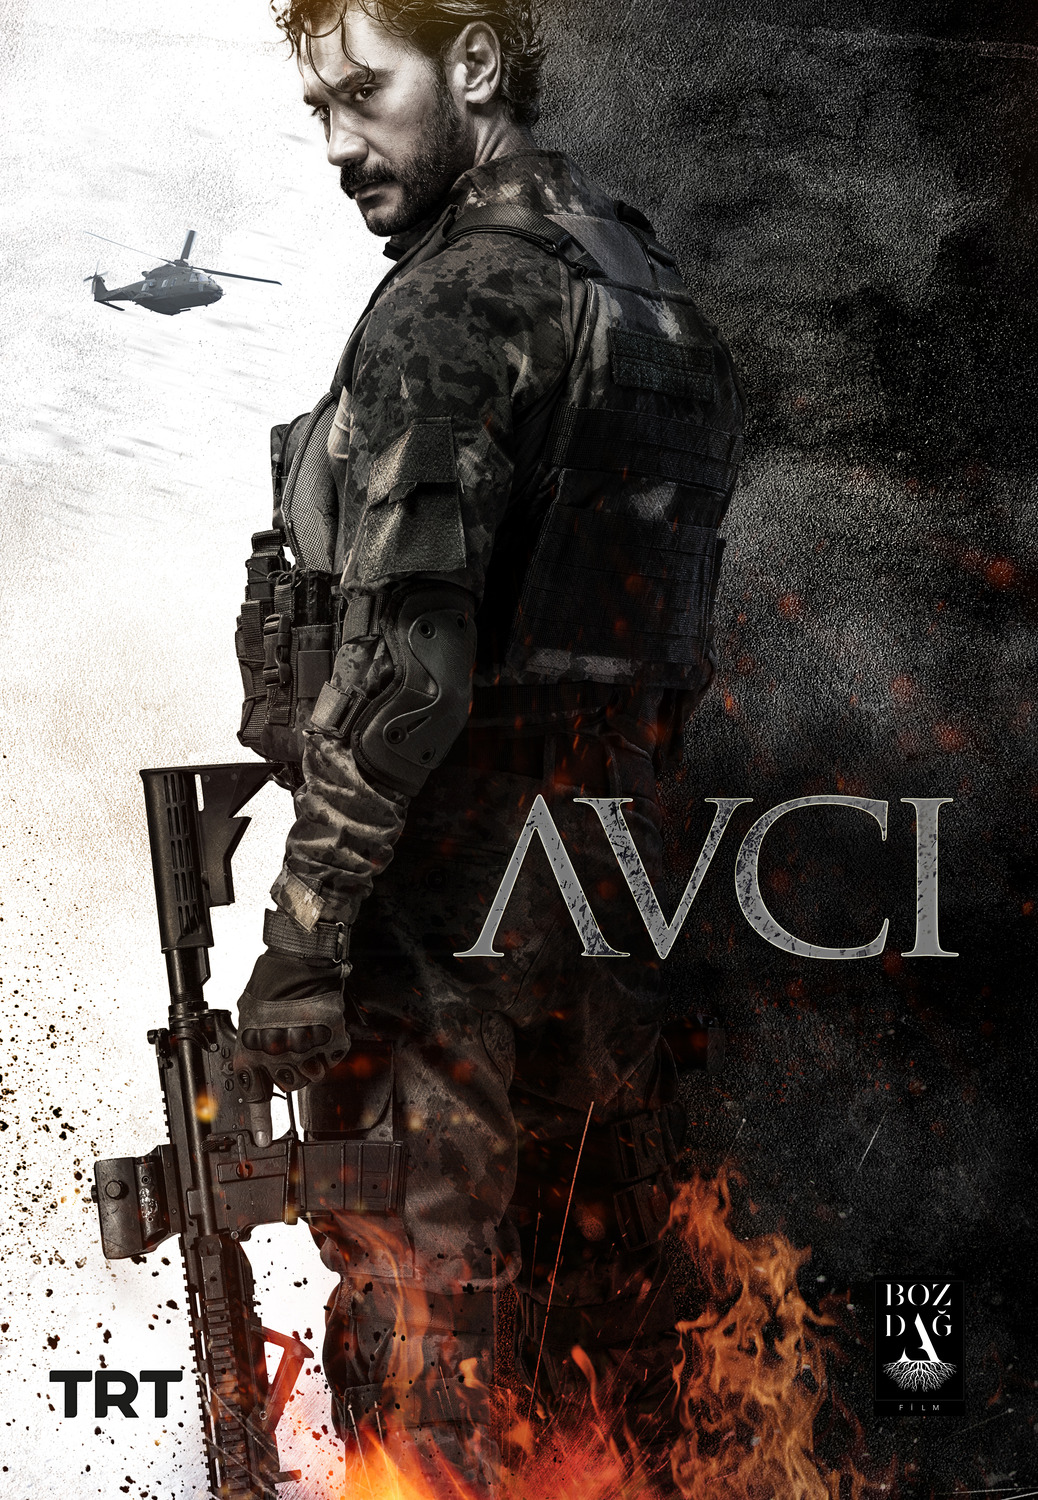 Extra Large TV Poster Image for Avci (#1 of 5)